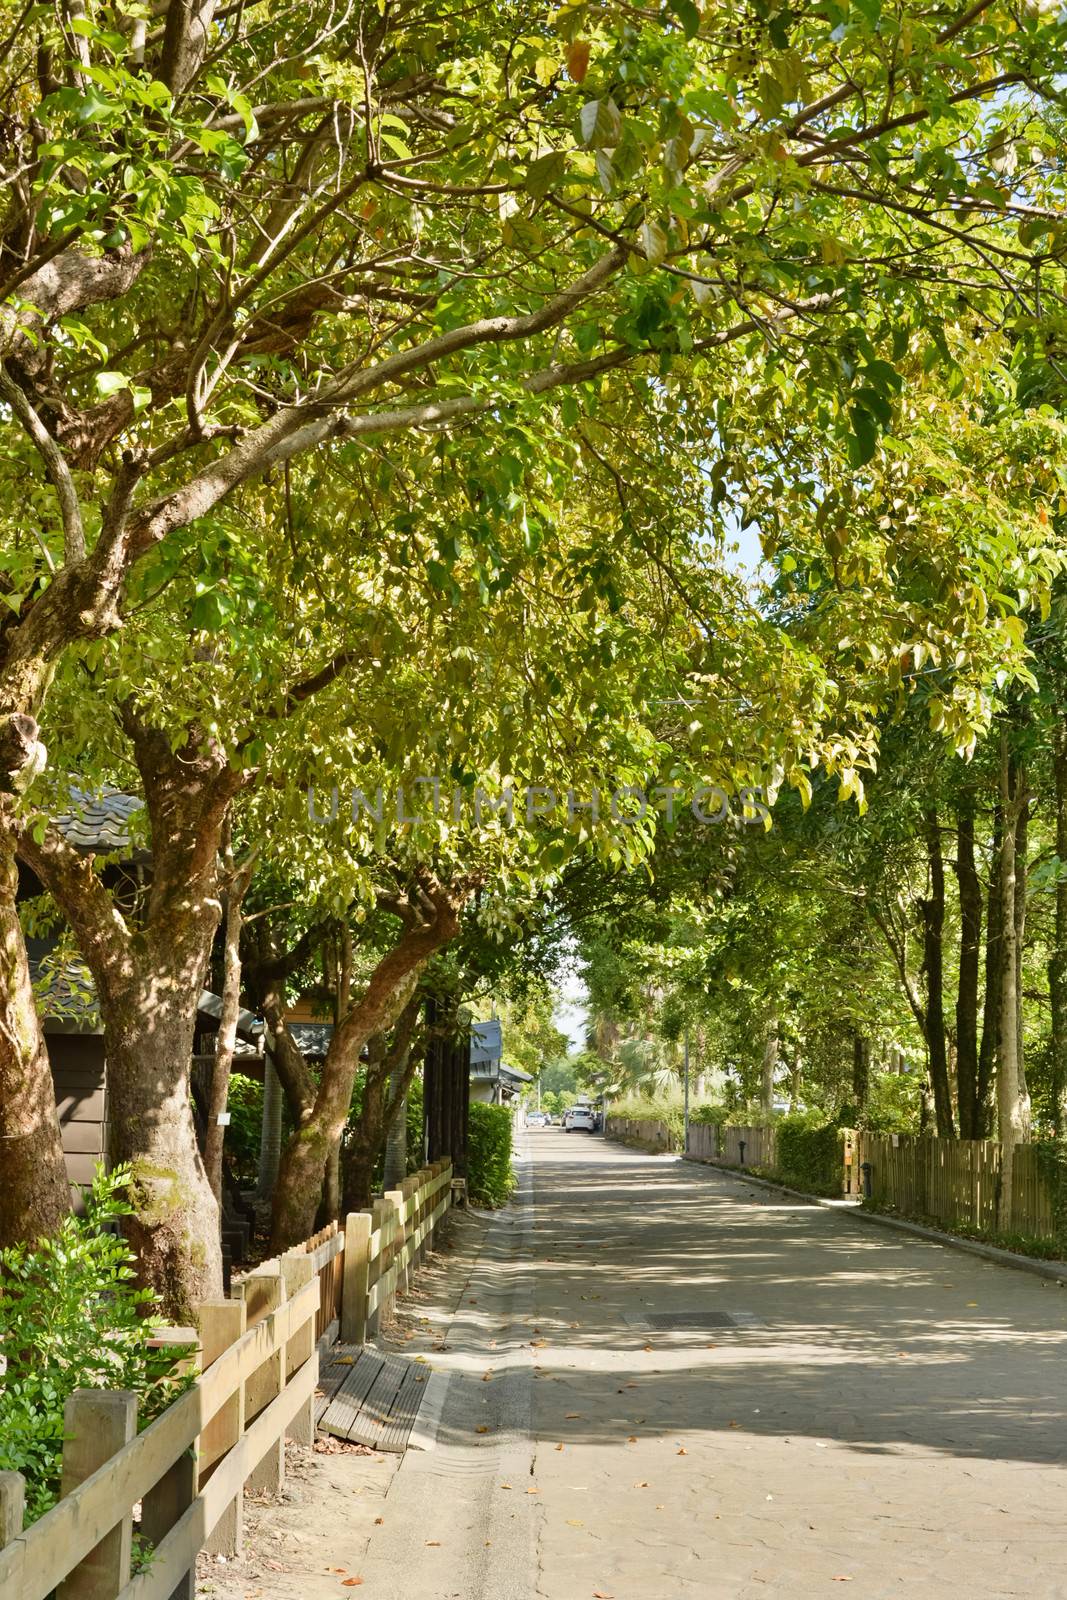 Street road with tree, shot at Luodong Forestry Culture Garden, Yilan, Taiwan, Asia.